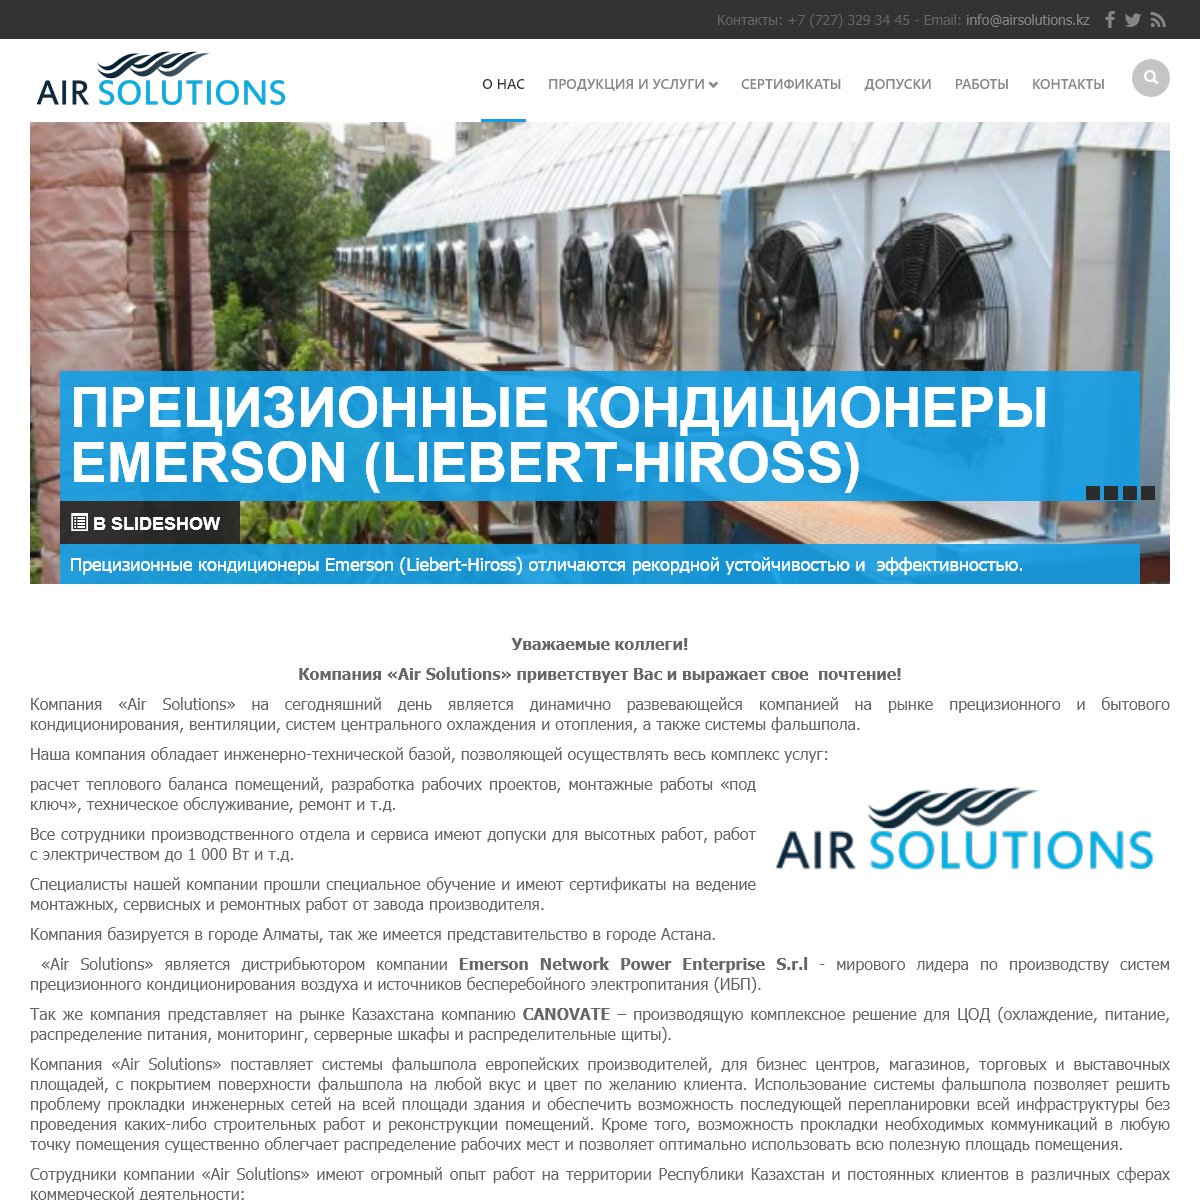 A complete backup of airsolutions.kz